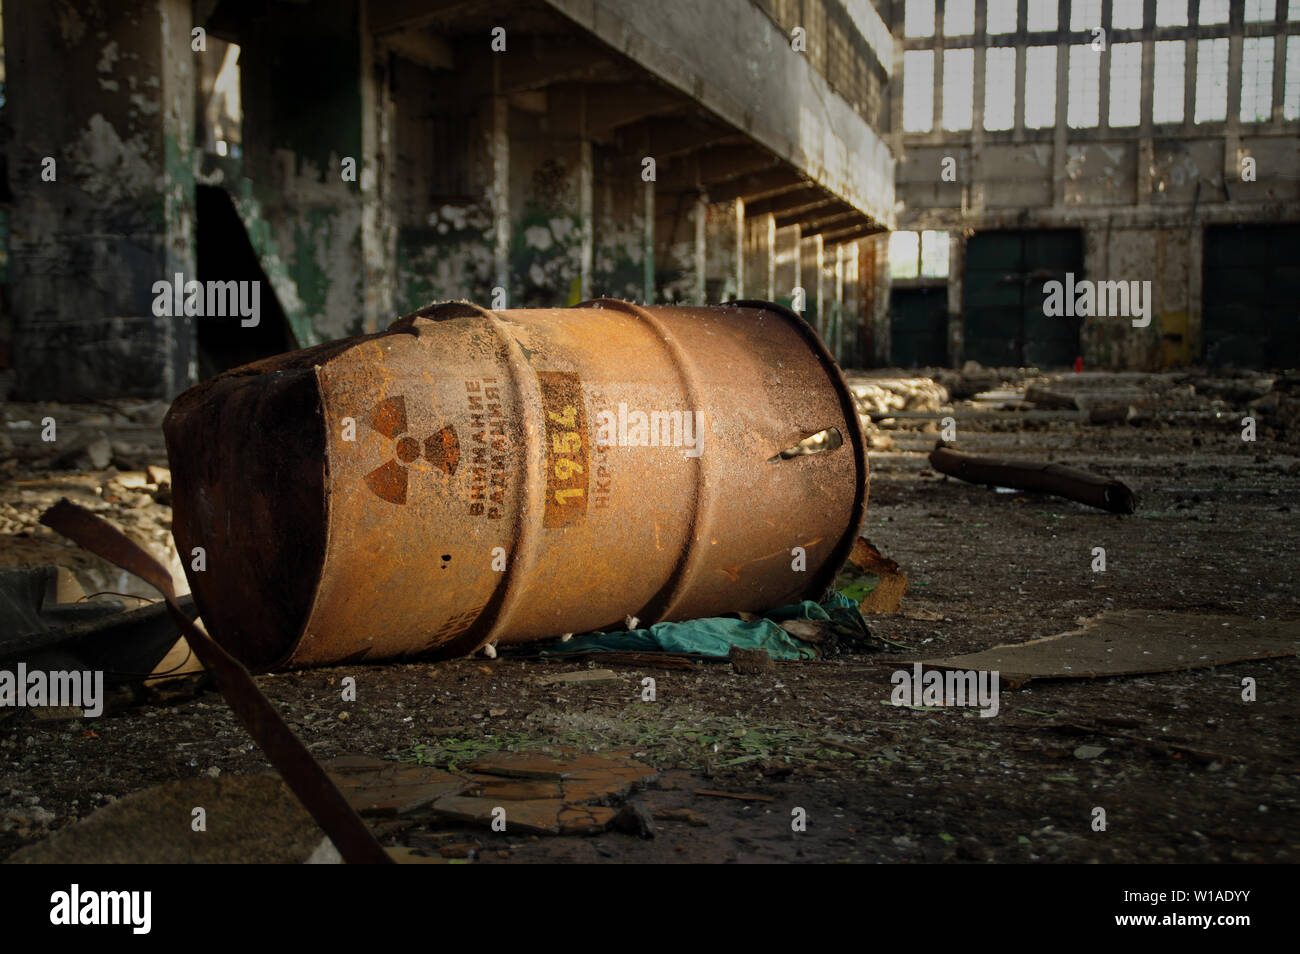 Radioactive warning on old rusty barrel in destroyed and forgotten building. Radiation symbol with russian alert on waste container after nuclear. Stock Photo